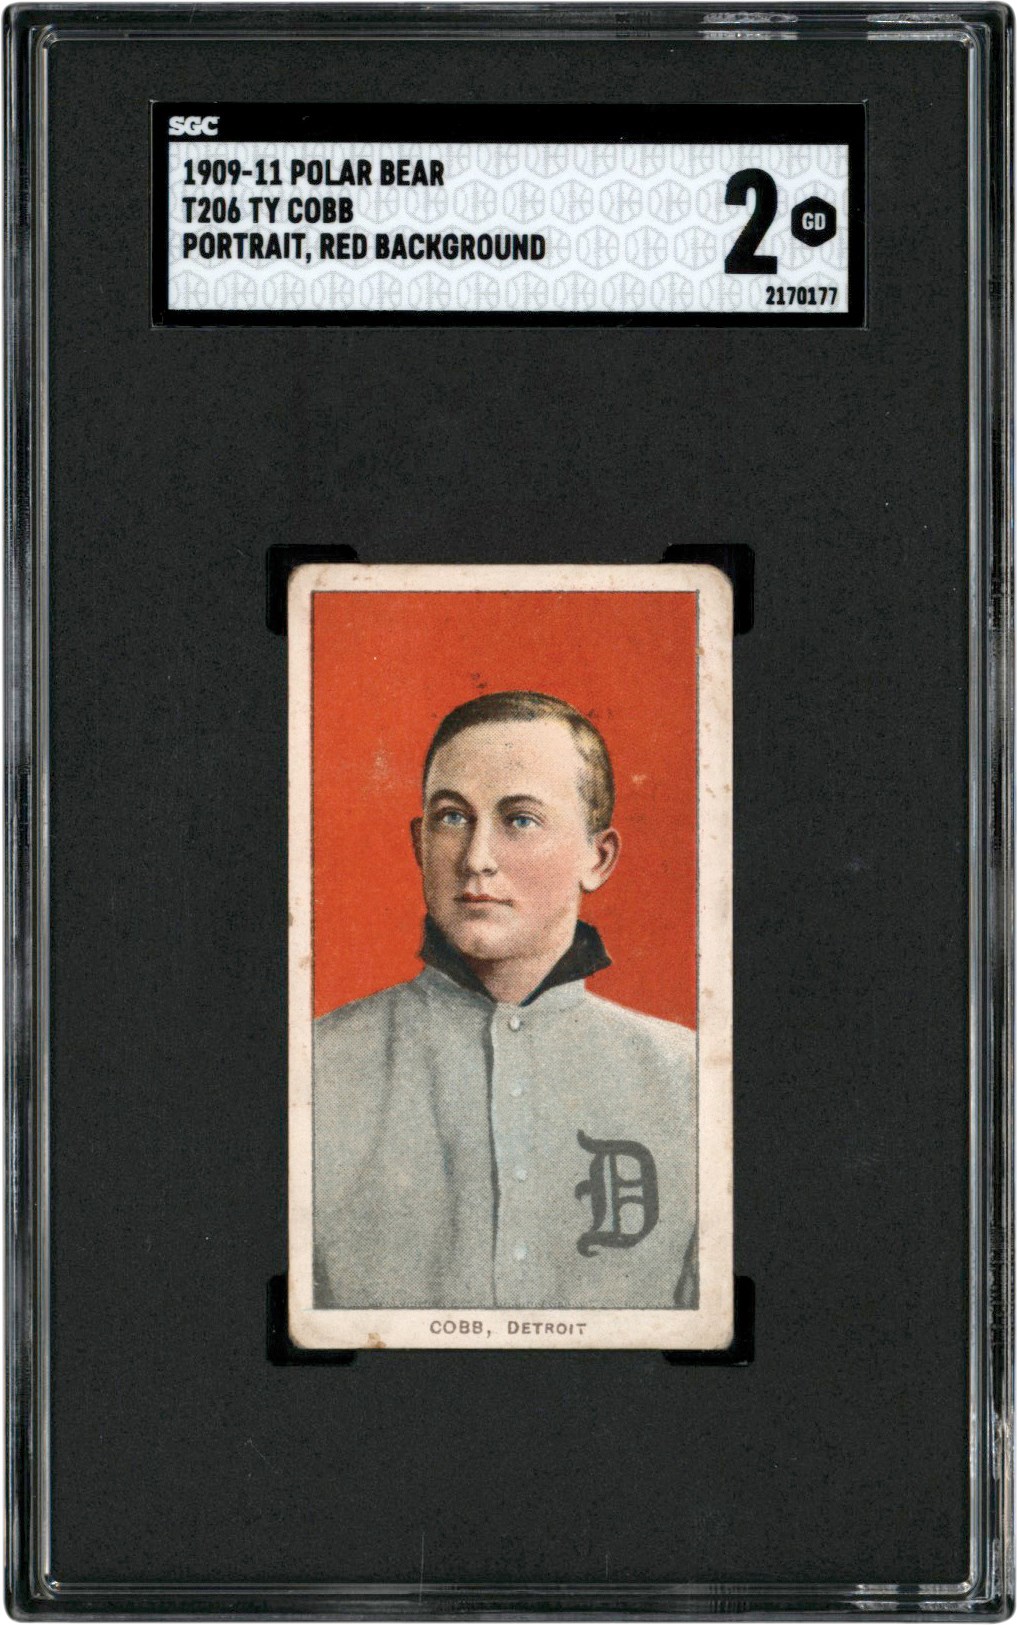 Baseball and Trading Cards - 909-1911 T206 Ty Cobb (Red Portrait / Polar Bear) SGC GD 2